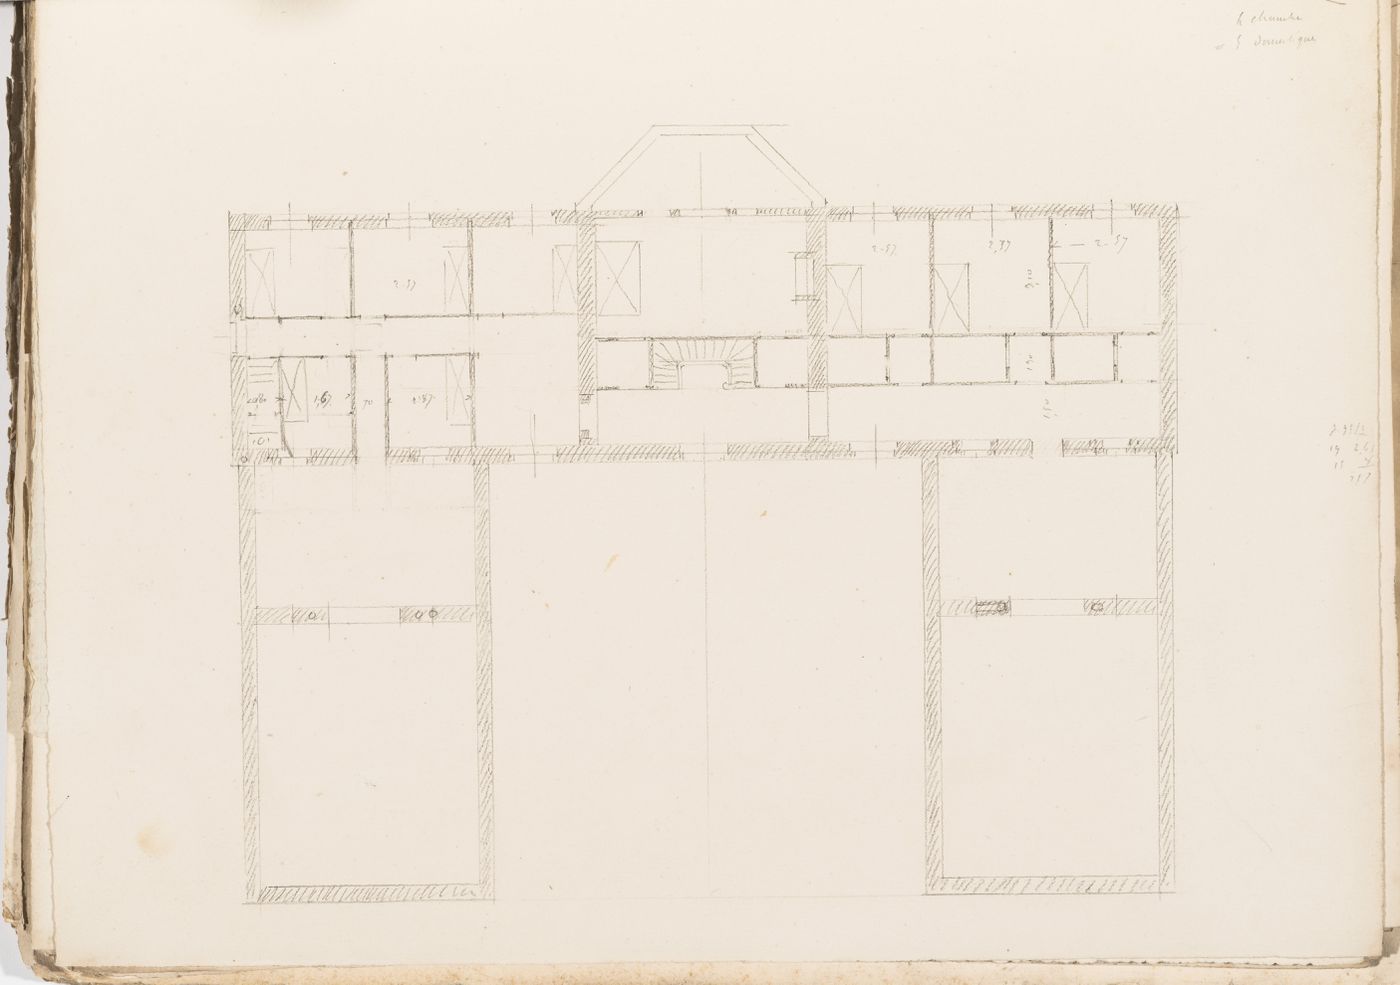 Project no. 1 for a country house for comte Treilhard: Second floor plan